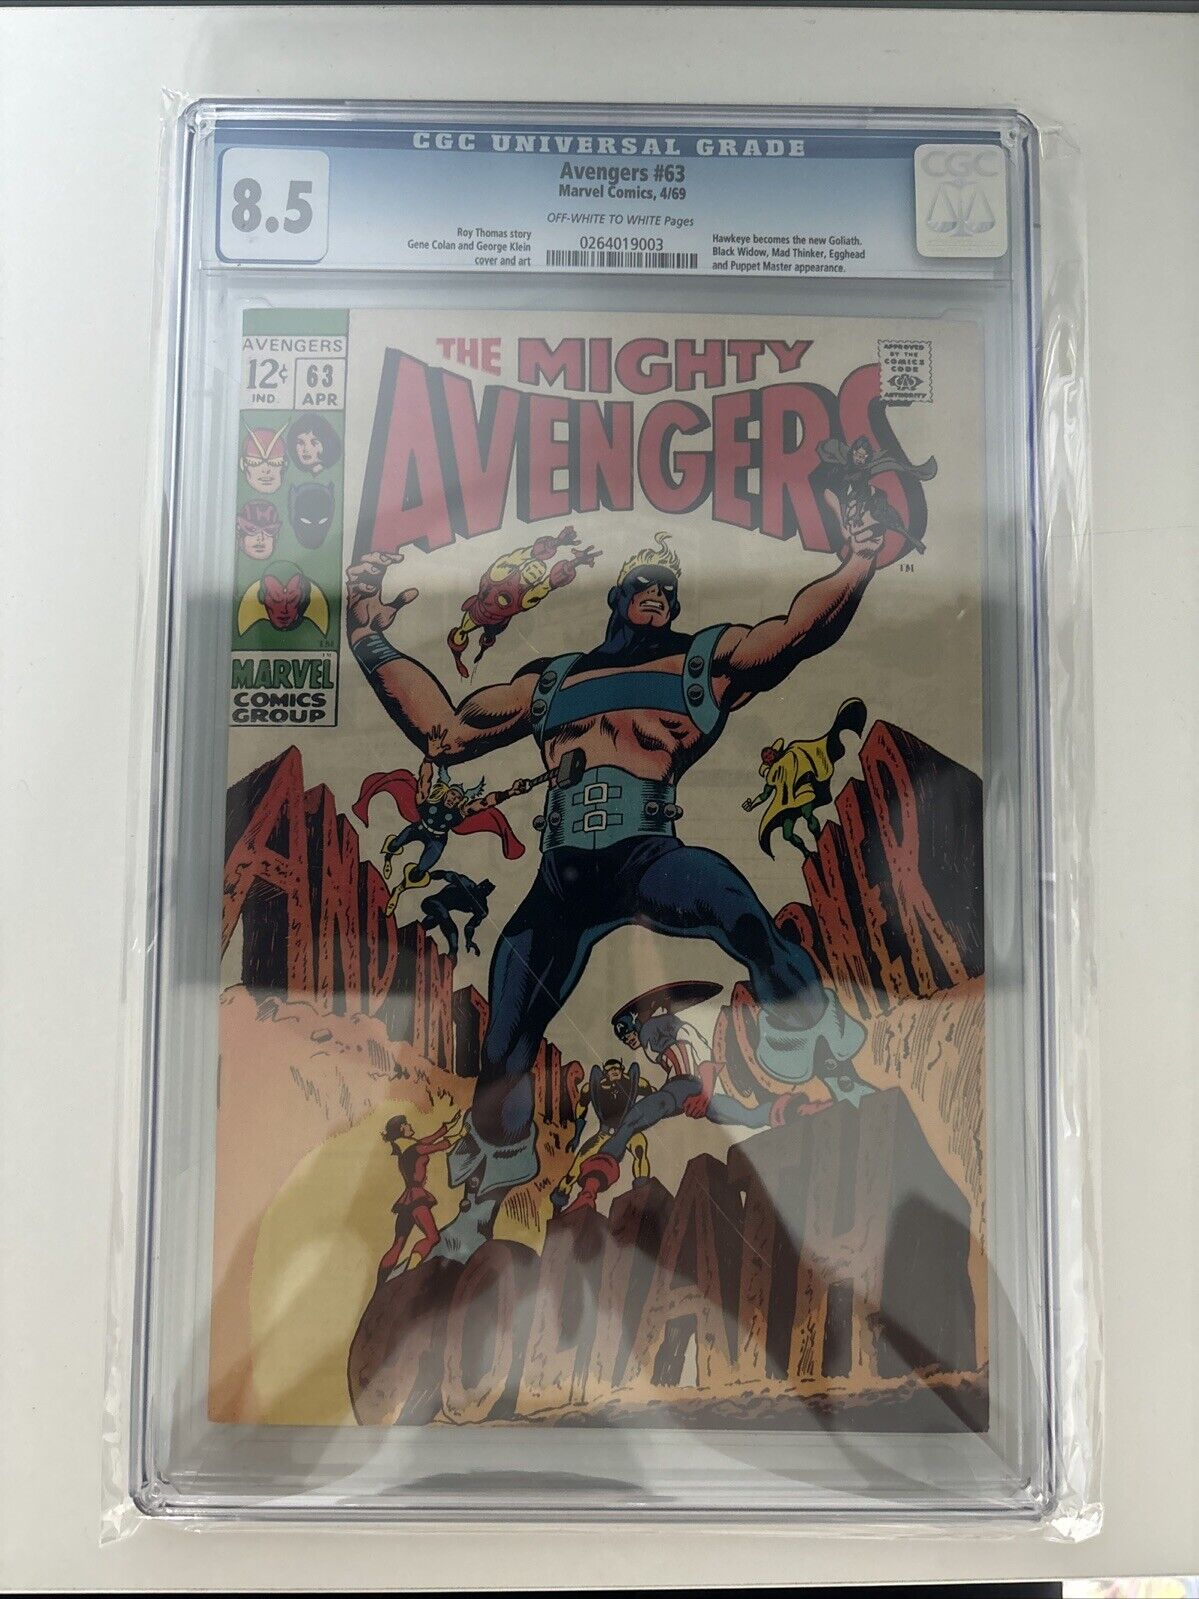 AVENGERS #63 1969 CGC 8.5 OW/W HAWKEYE BECOMES THE NEW GOLIATH